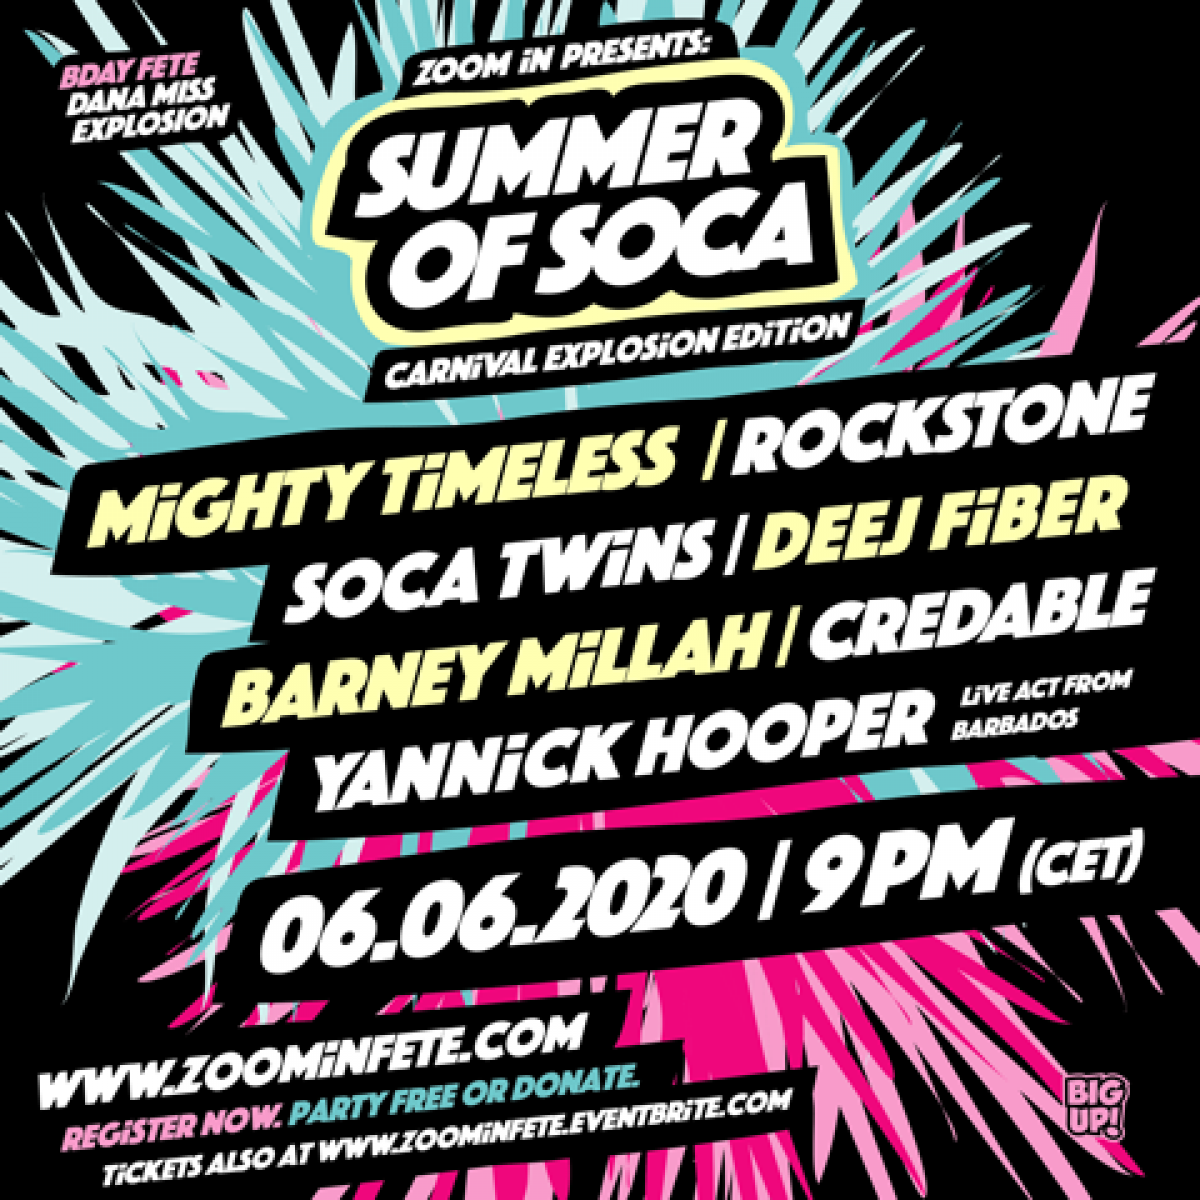 Summer of Soca - The Carnival Explosion Edition flyer or graphic.